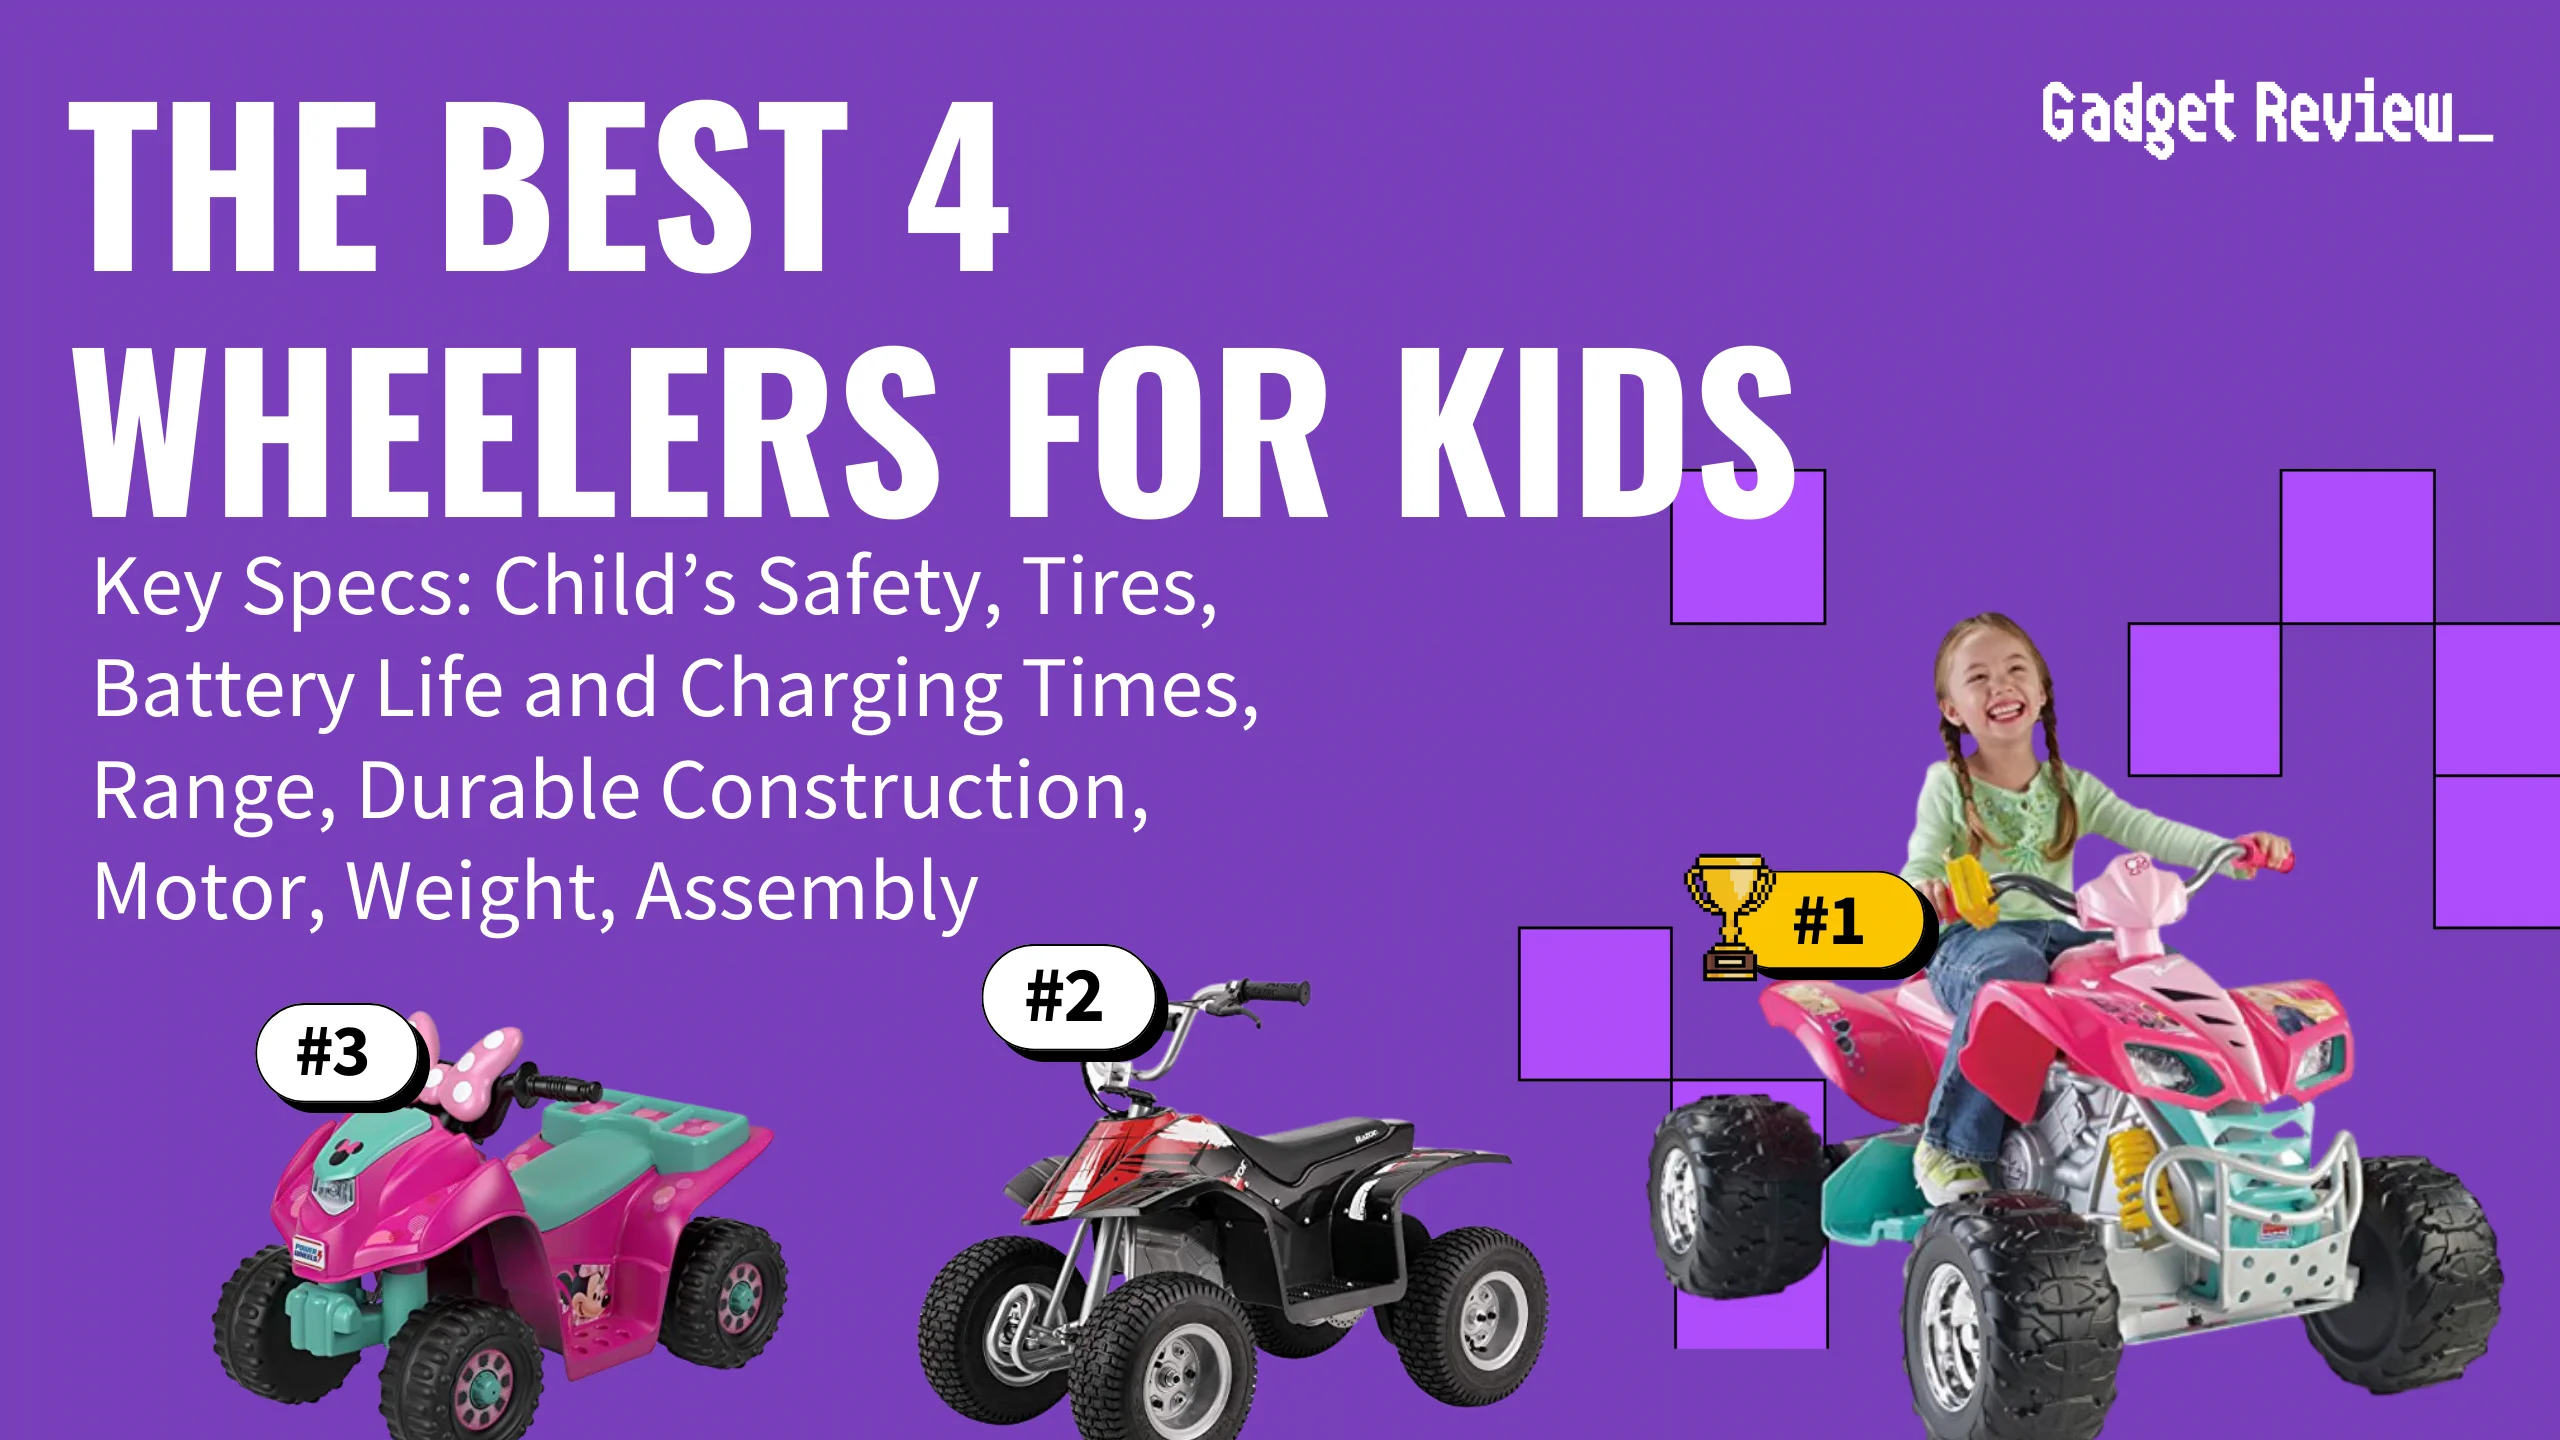 4 wheelers for kids featured image that shows the top three best motorcycle models